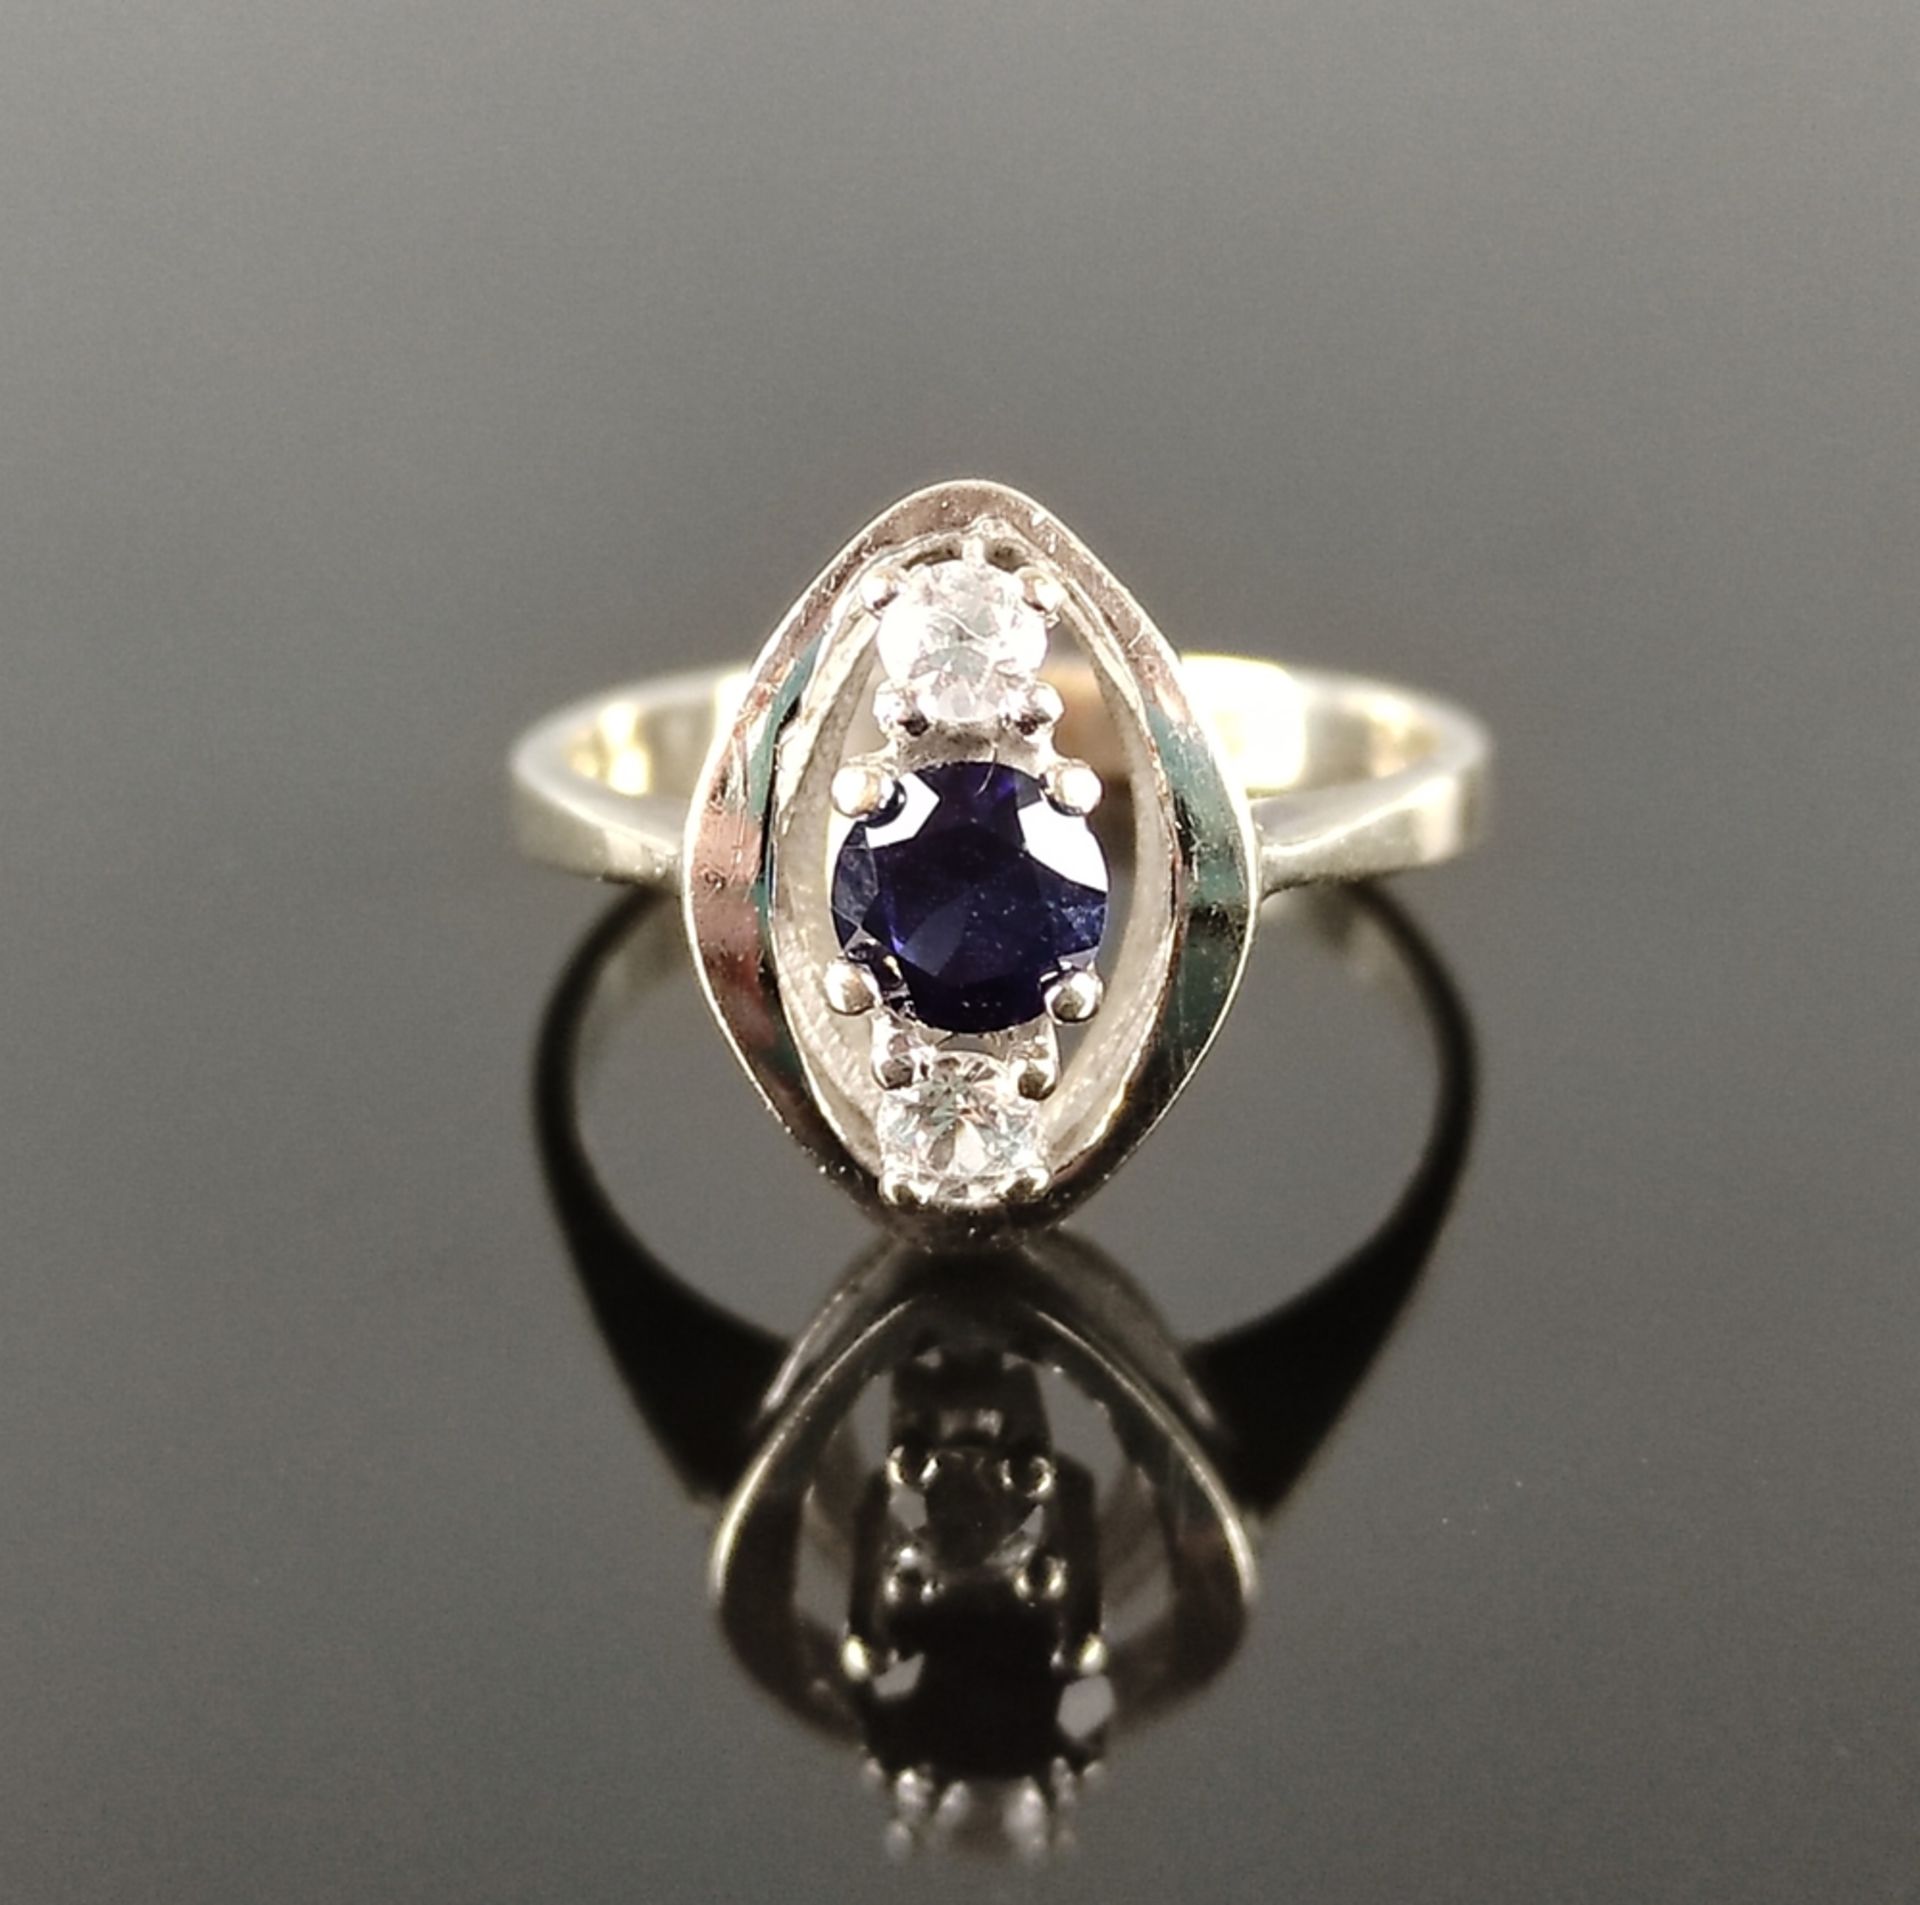 Sapphire ring, two cubic zirconia and center sapphire around 0.4ct, 333/8K white gold, 2.7g, ring s - Image 2 of 4